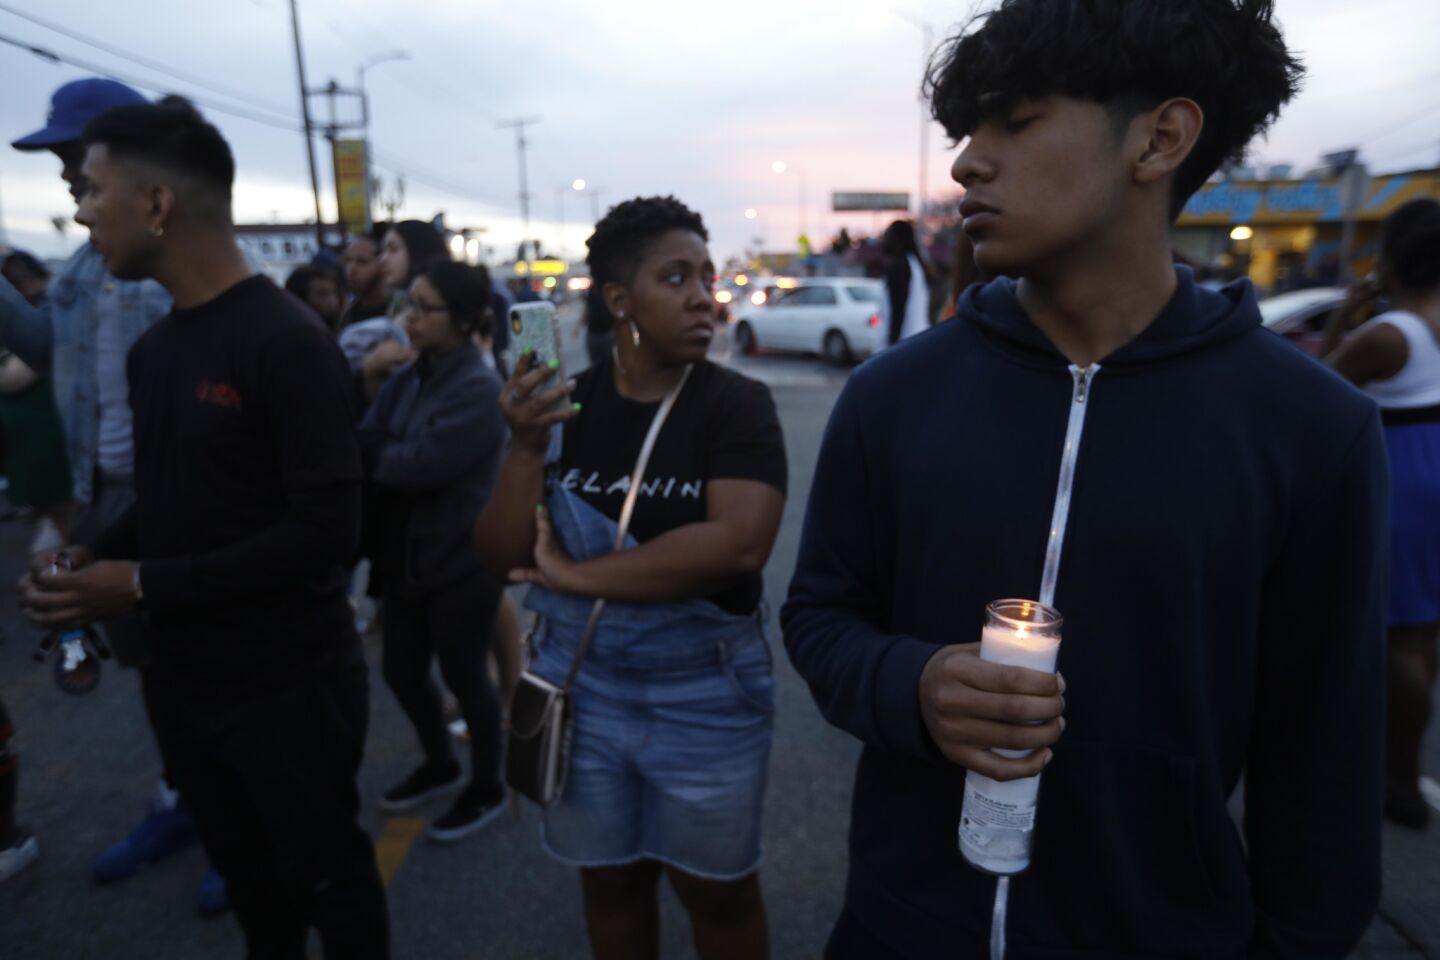 Hugo Rojas, 17, holds a candle in memory of rapper Nipsey Hussle, who was shot multiple times Sunday in South L.A.